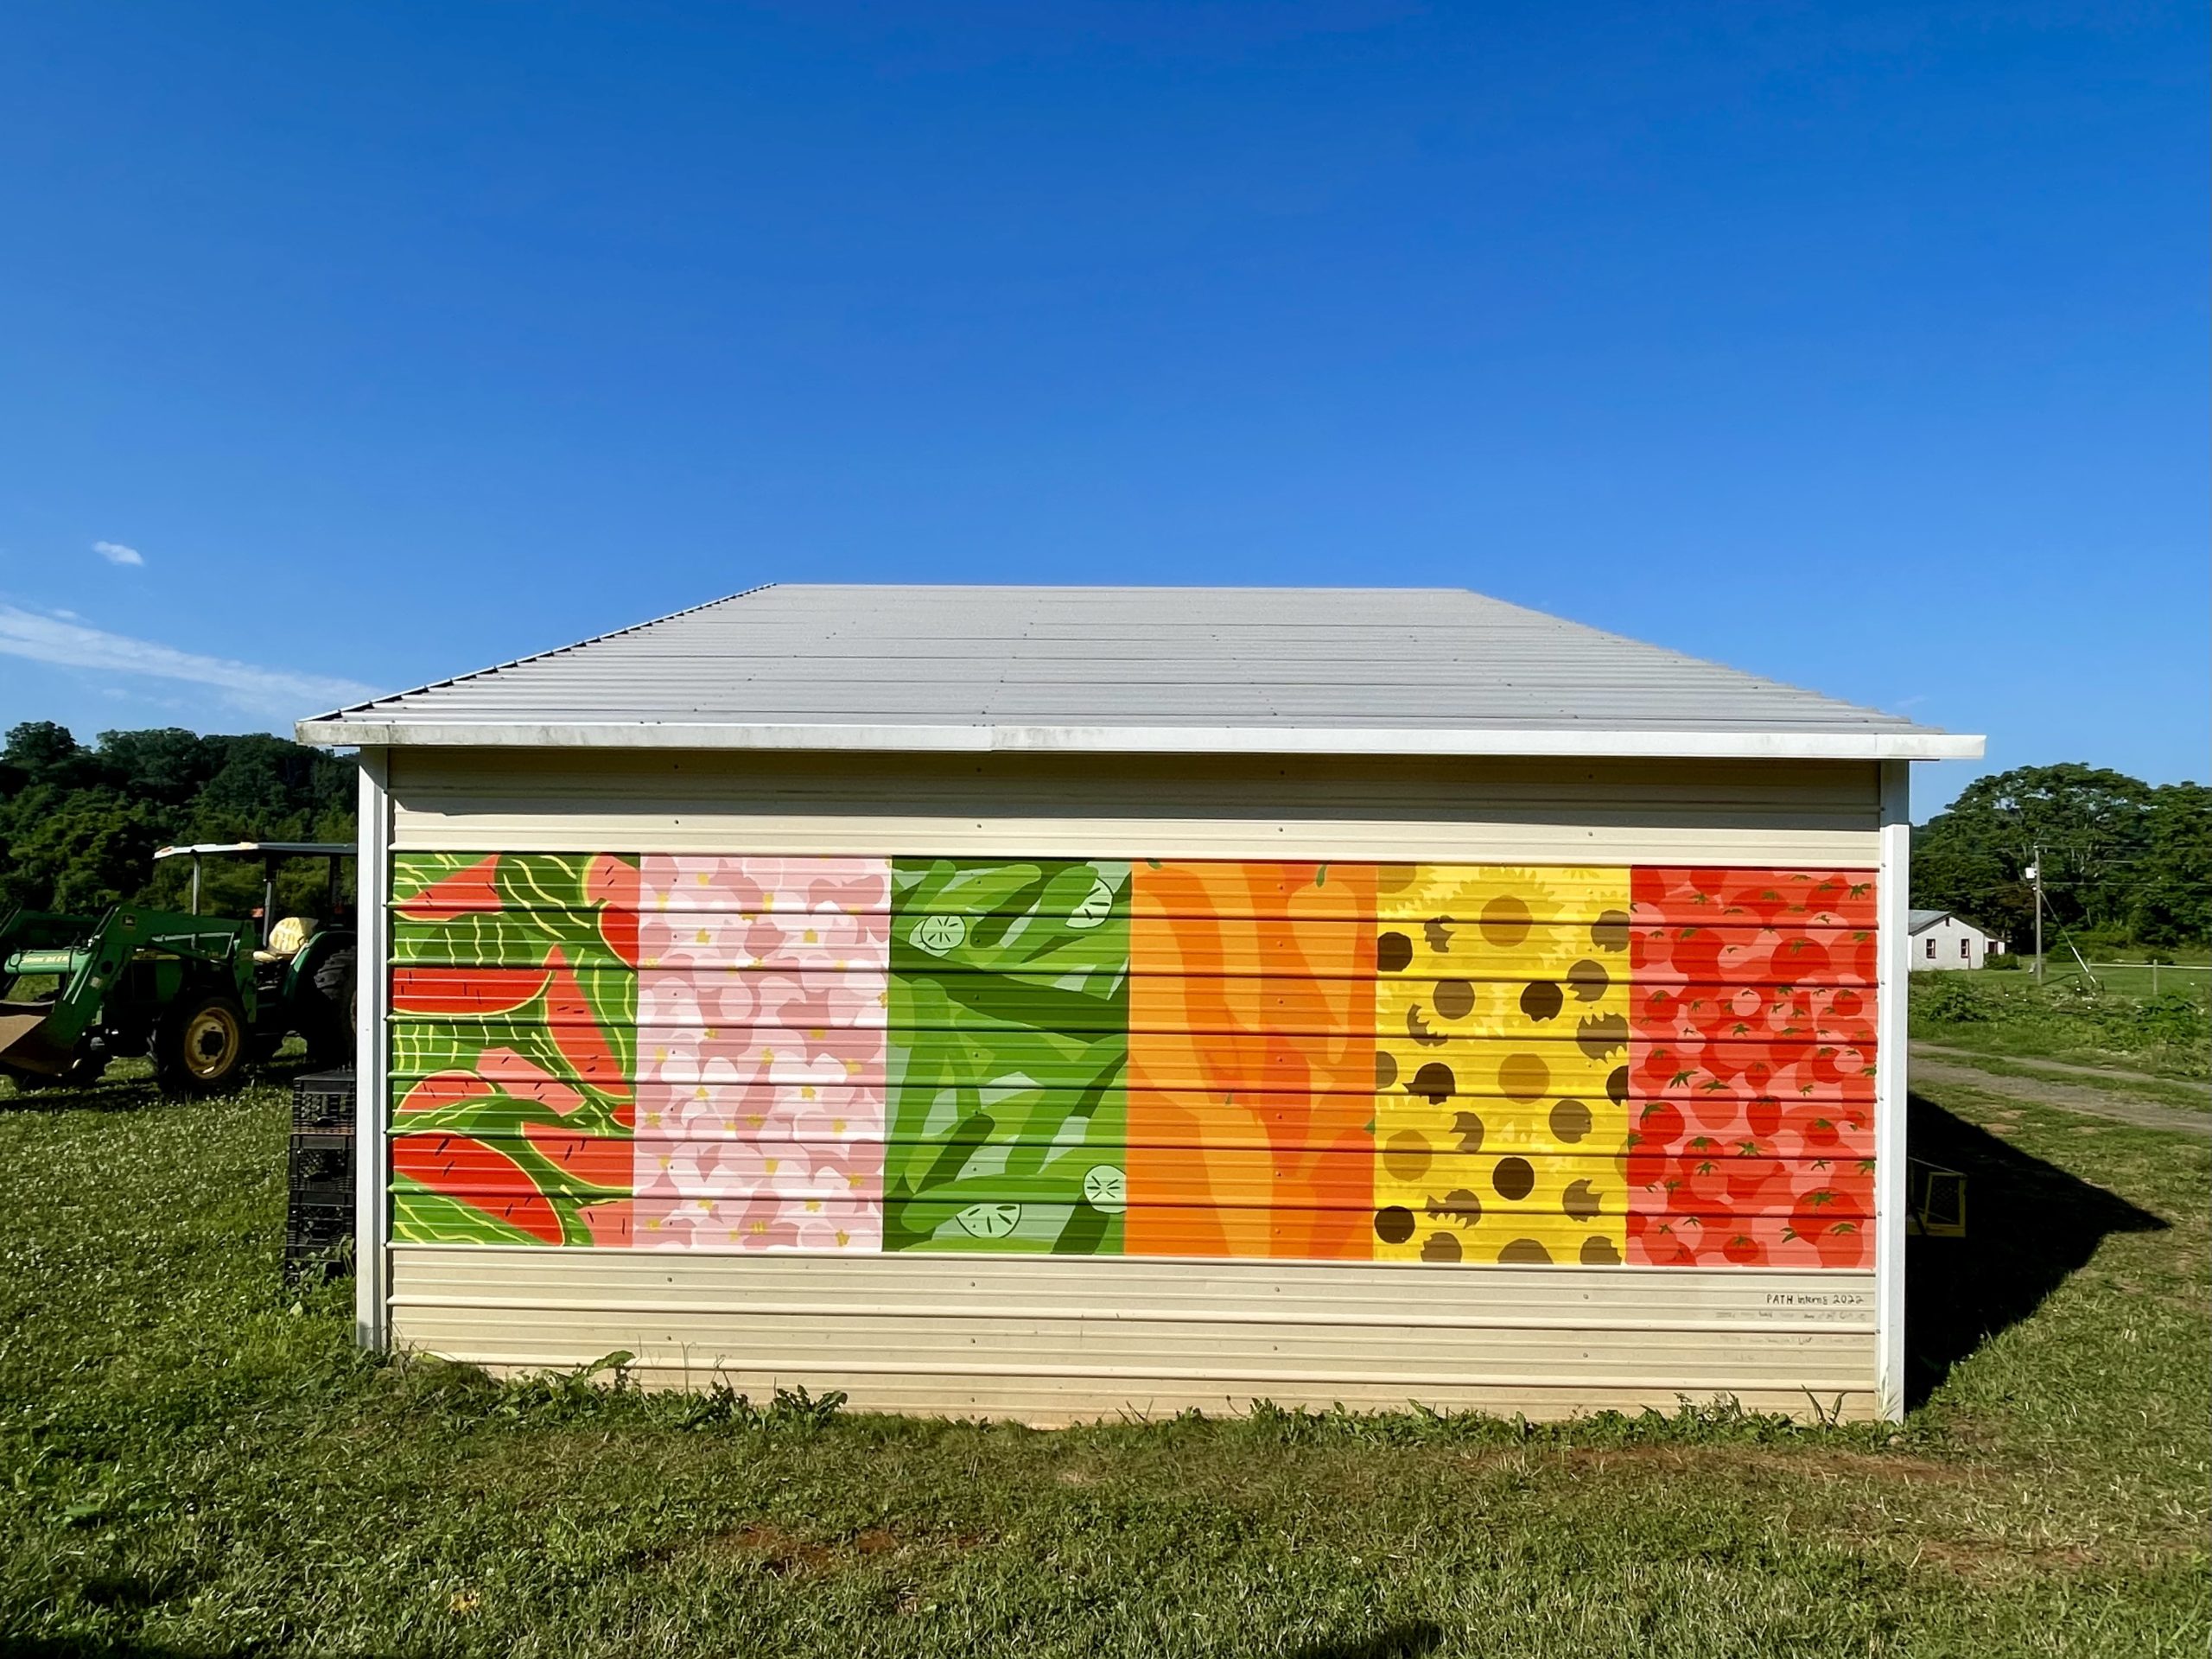 A colorful mural in a minimal style, depicting watermelon, dogwood, cucumbers, carrots, sunflowers and tomatoes. It is painted on the side of a tan shed.